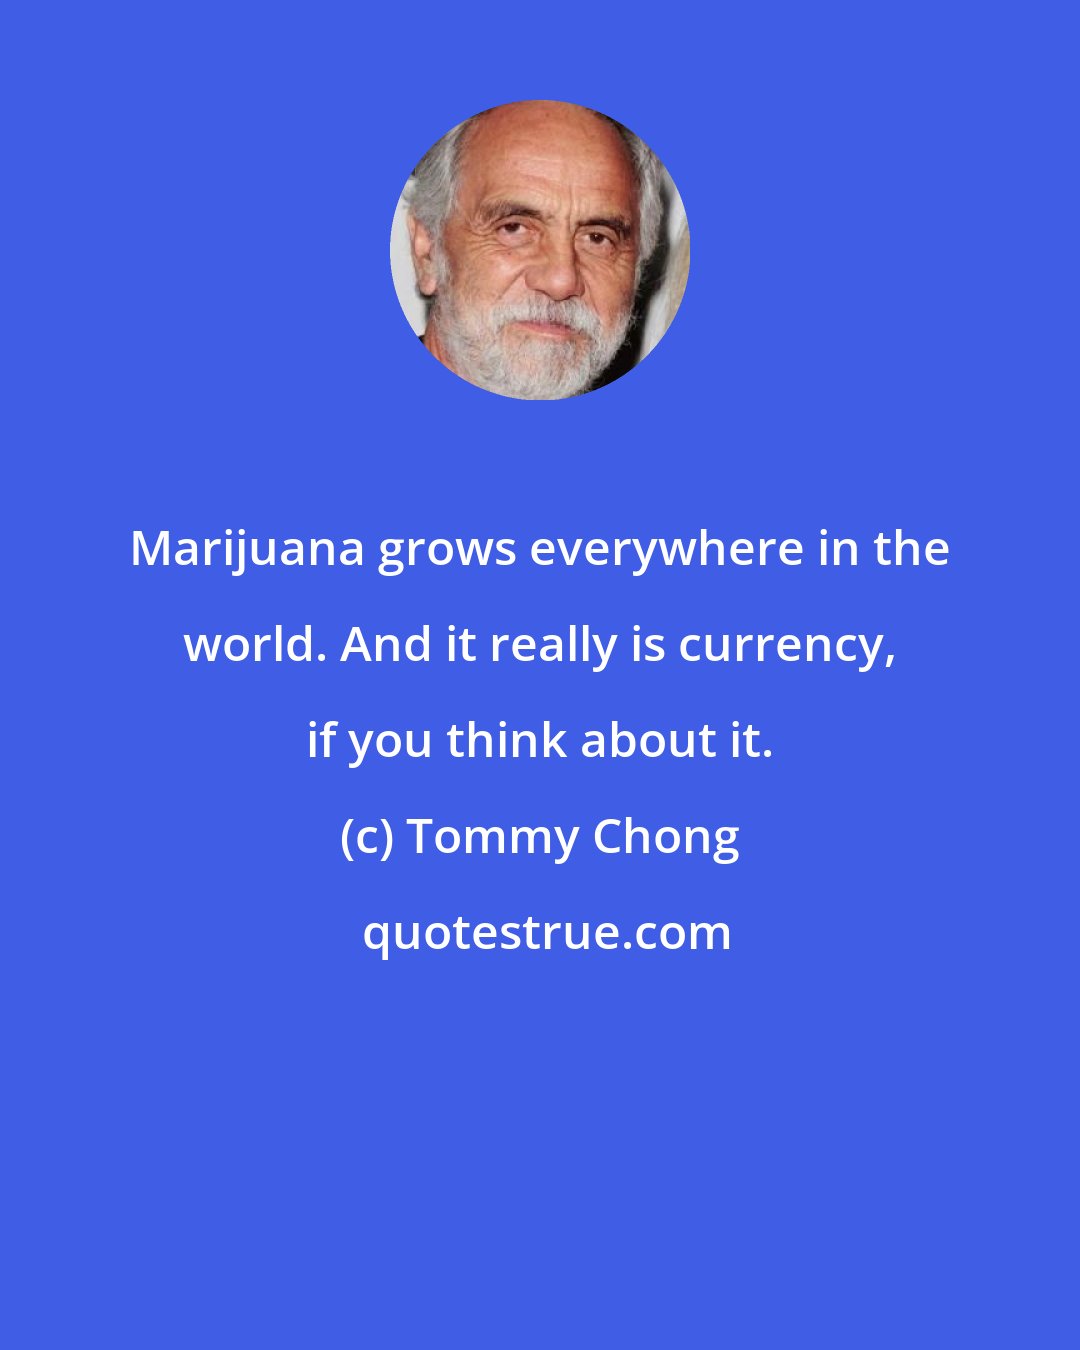 Tommy Chong: Marijuana grows everywhere in the world. And it really is currency, if you think about it.